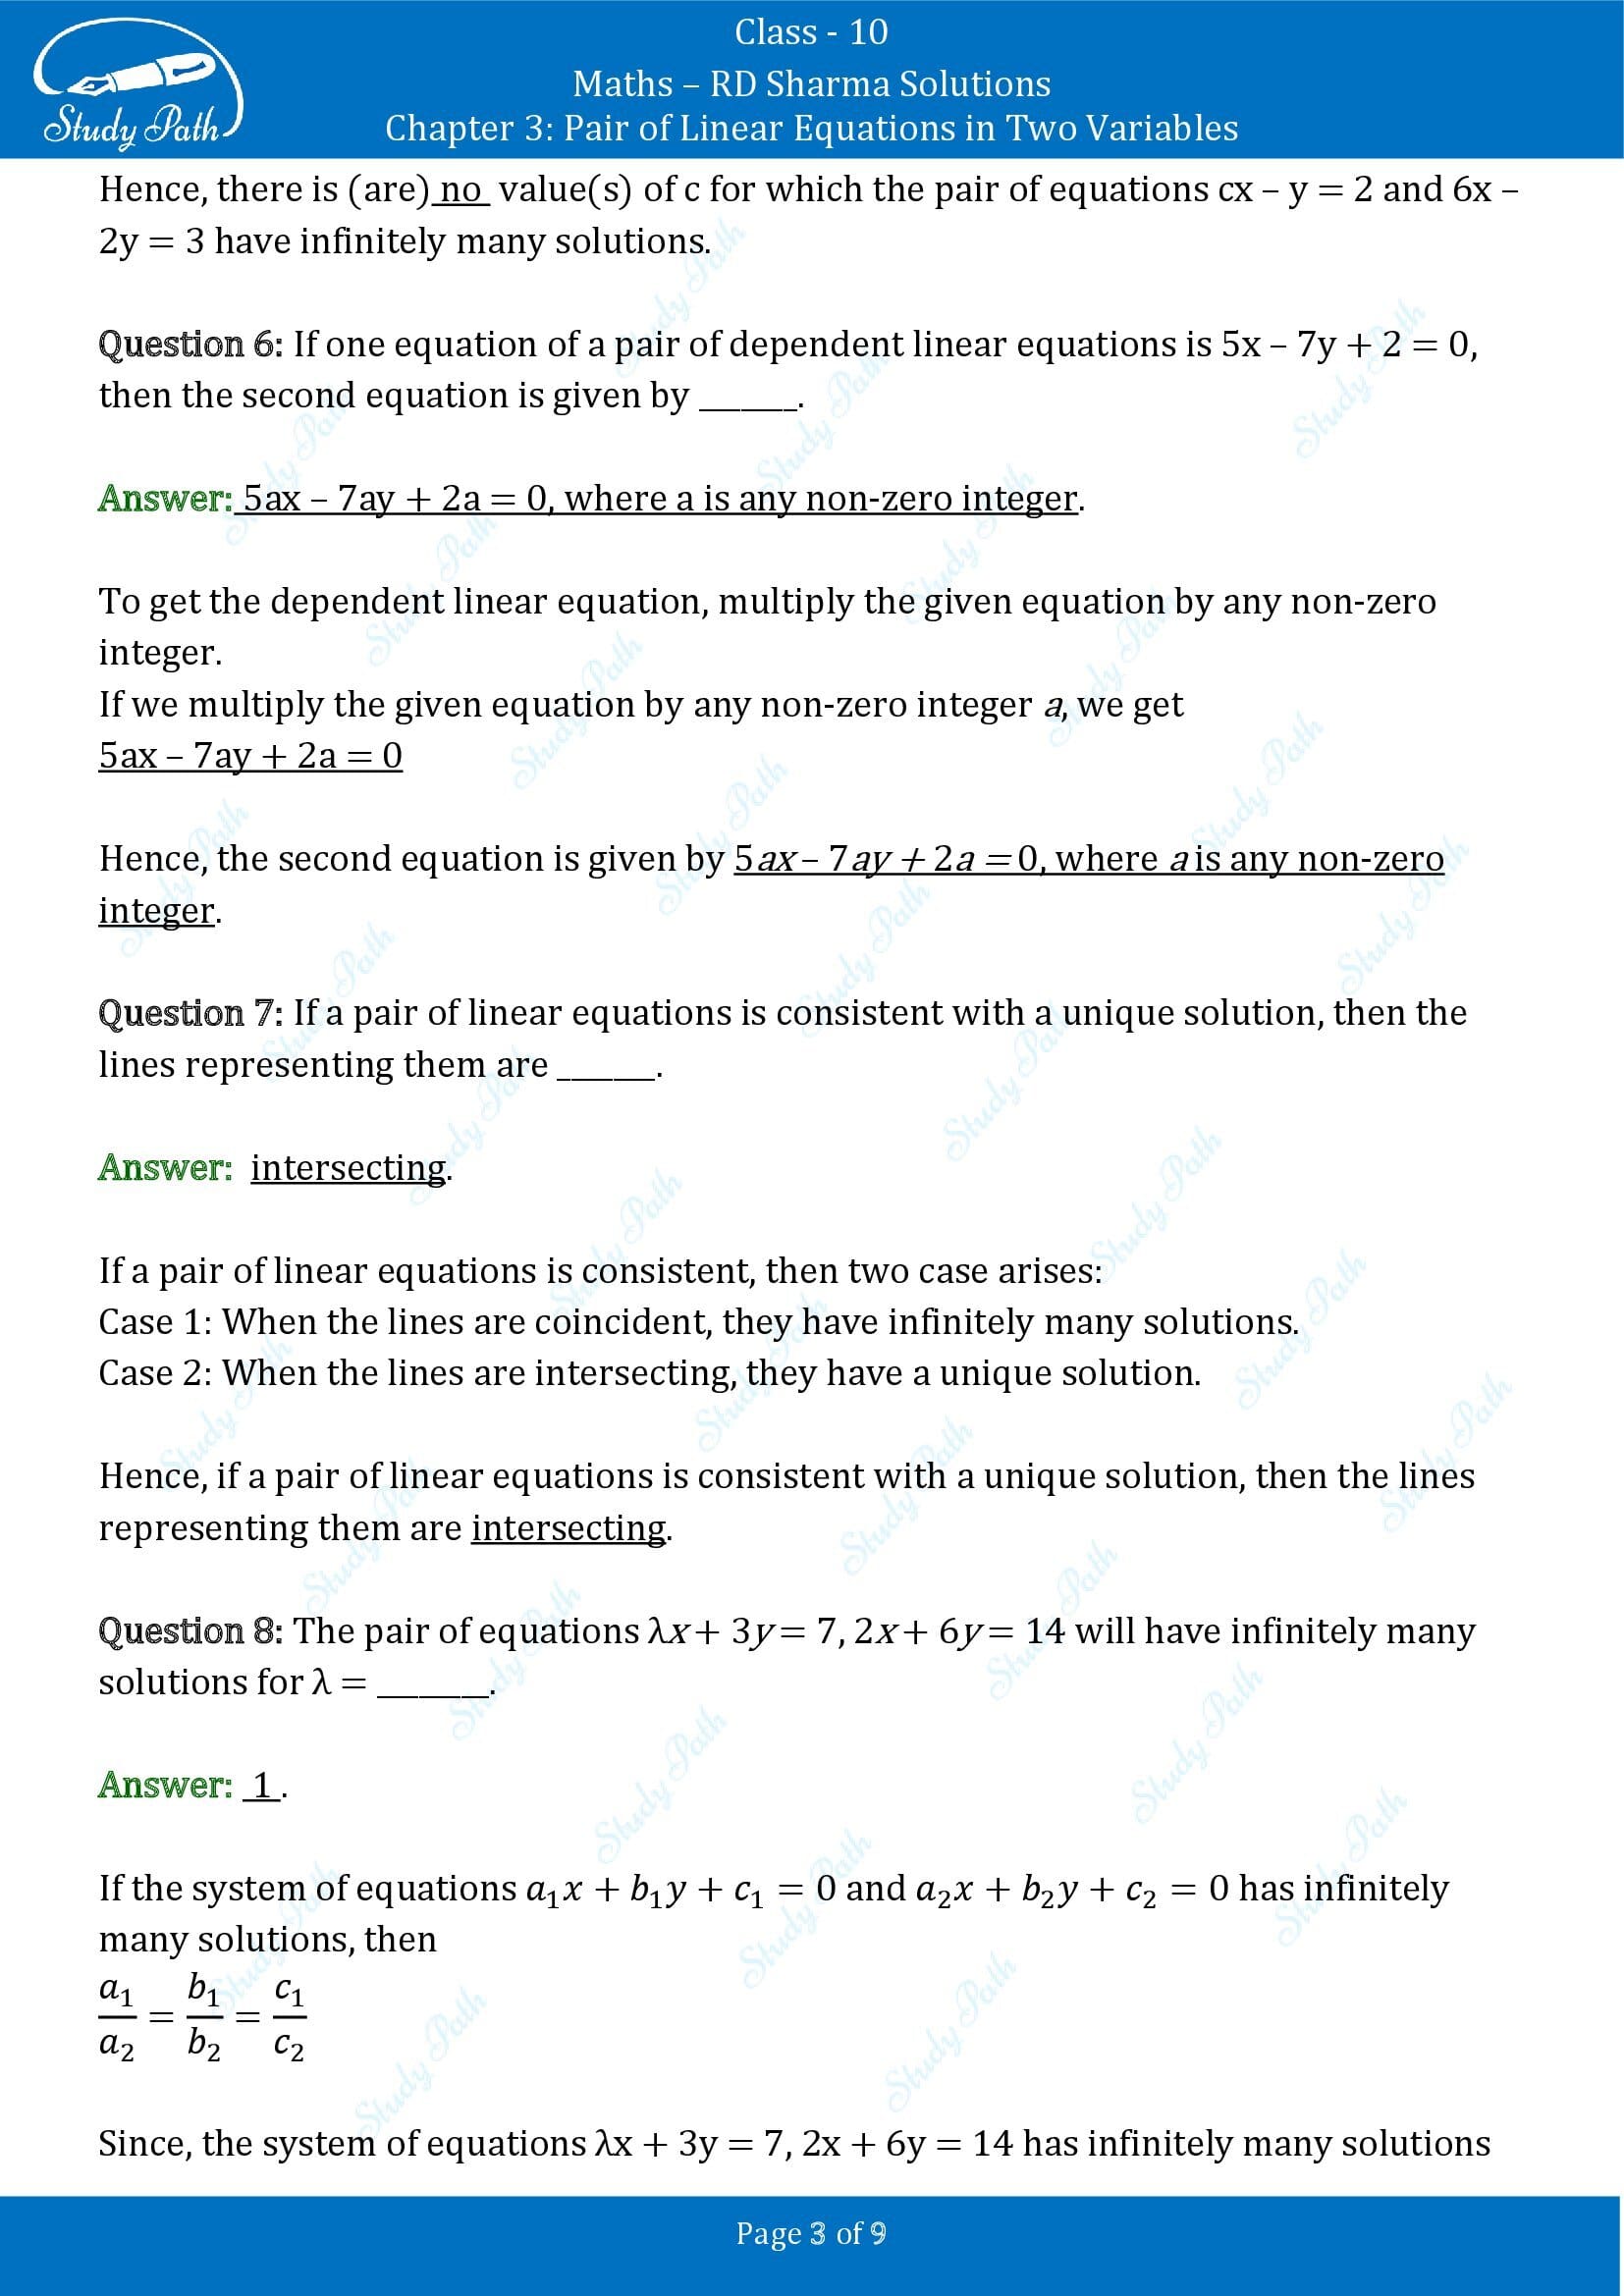 RD Sharma Solutions Class 10 Chapter 3 Pair of Linear Equations in Two Variables Exercise Fill in the Blank Type Questions FBQs 00003